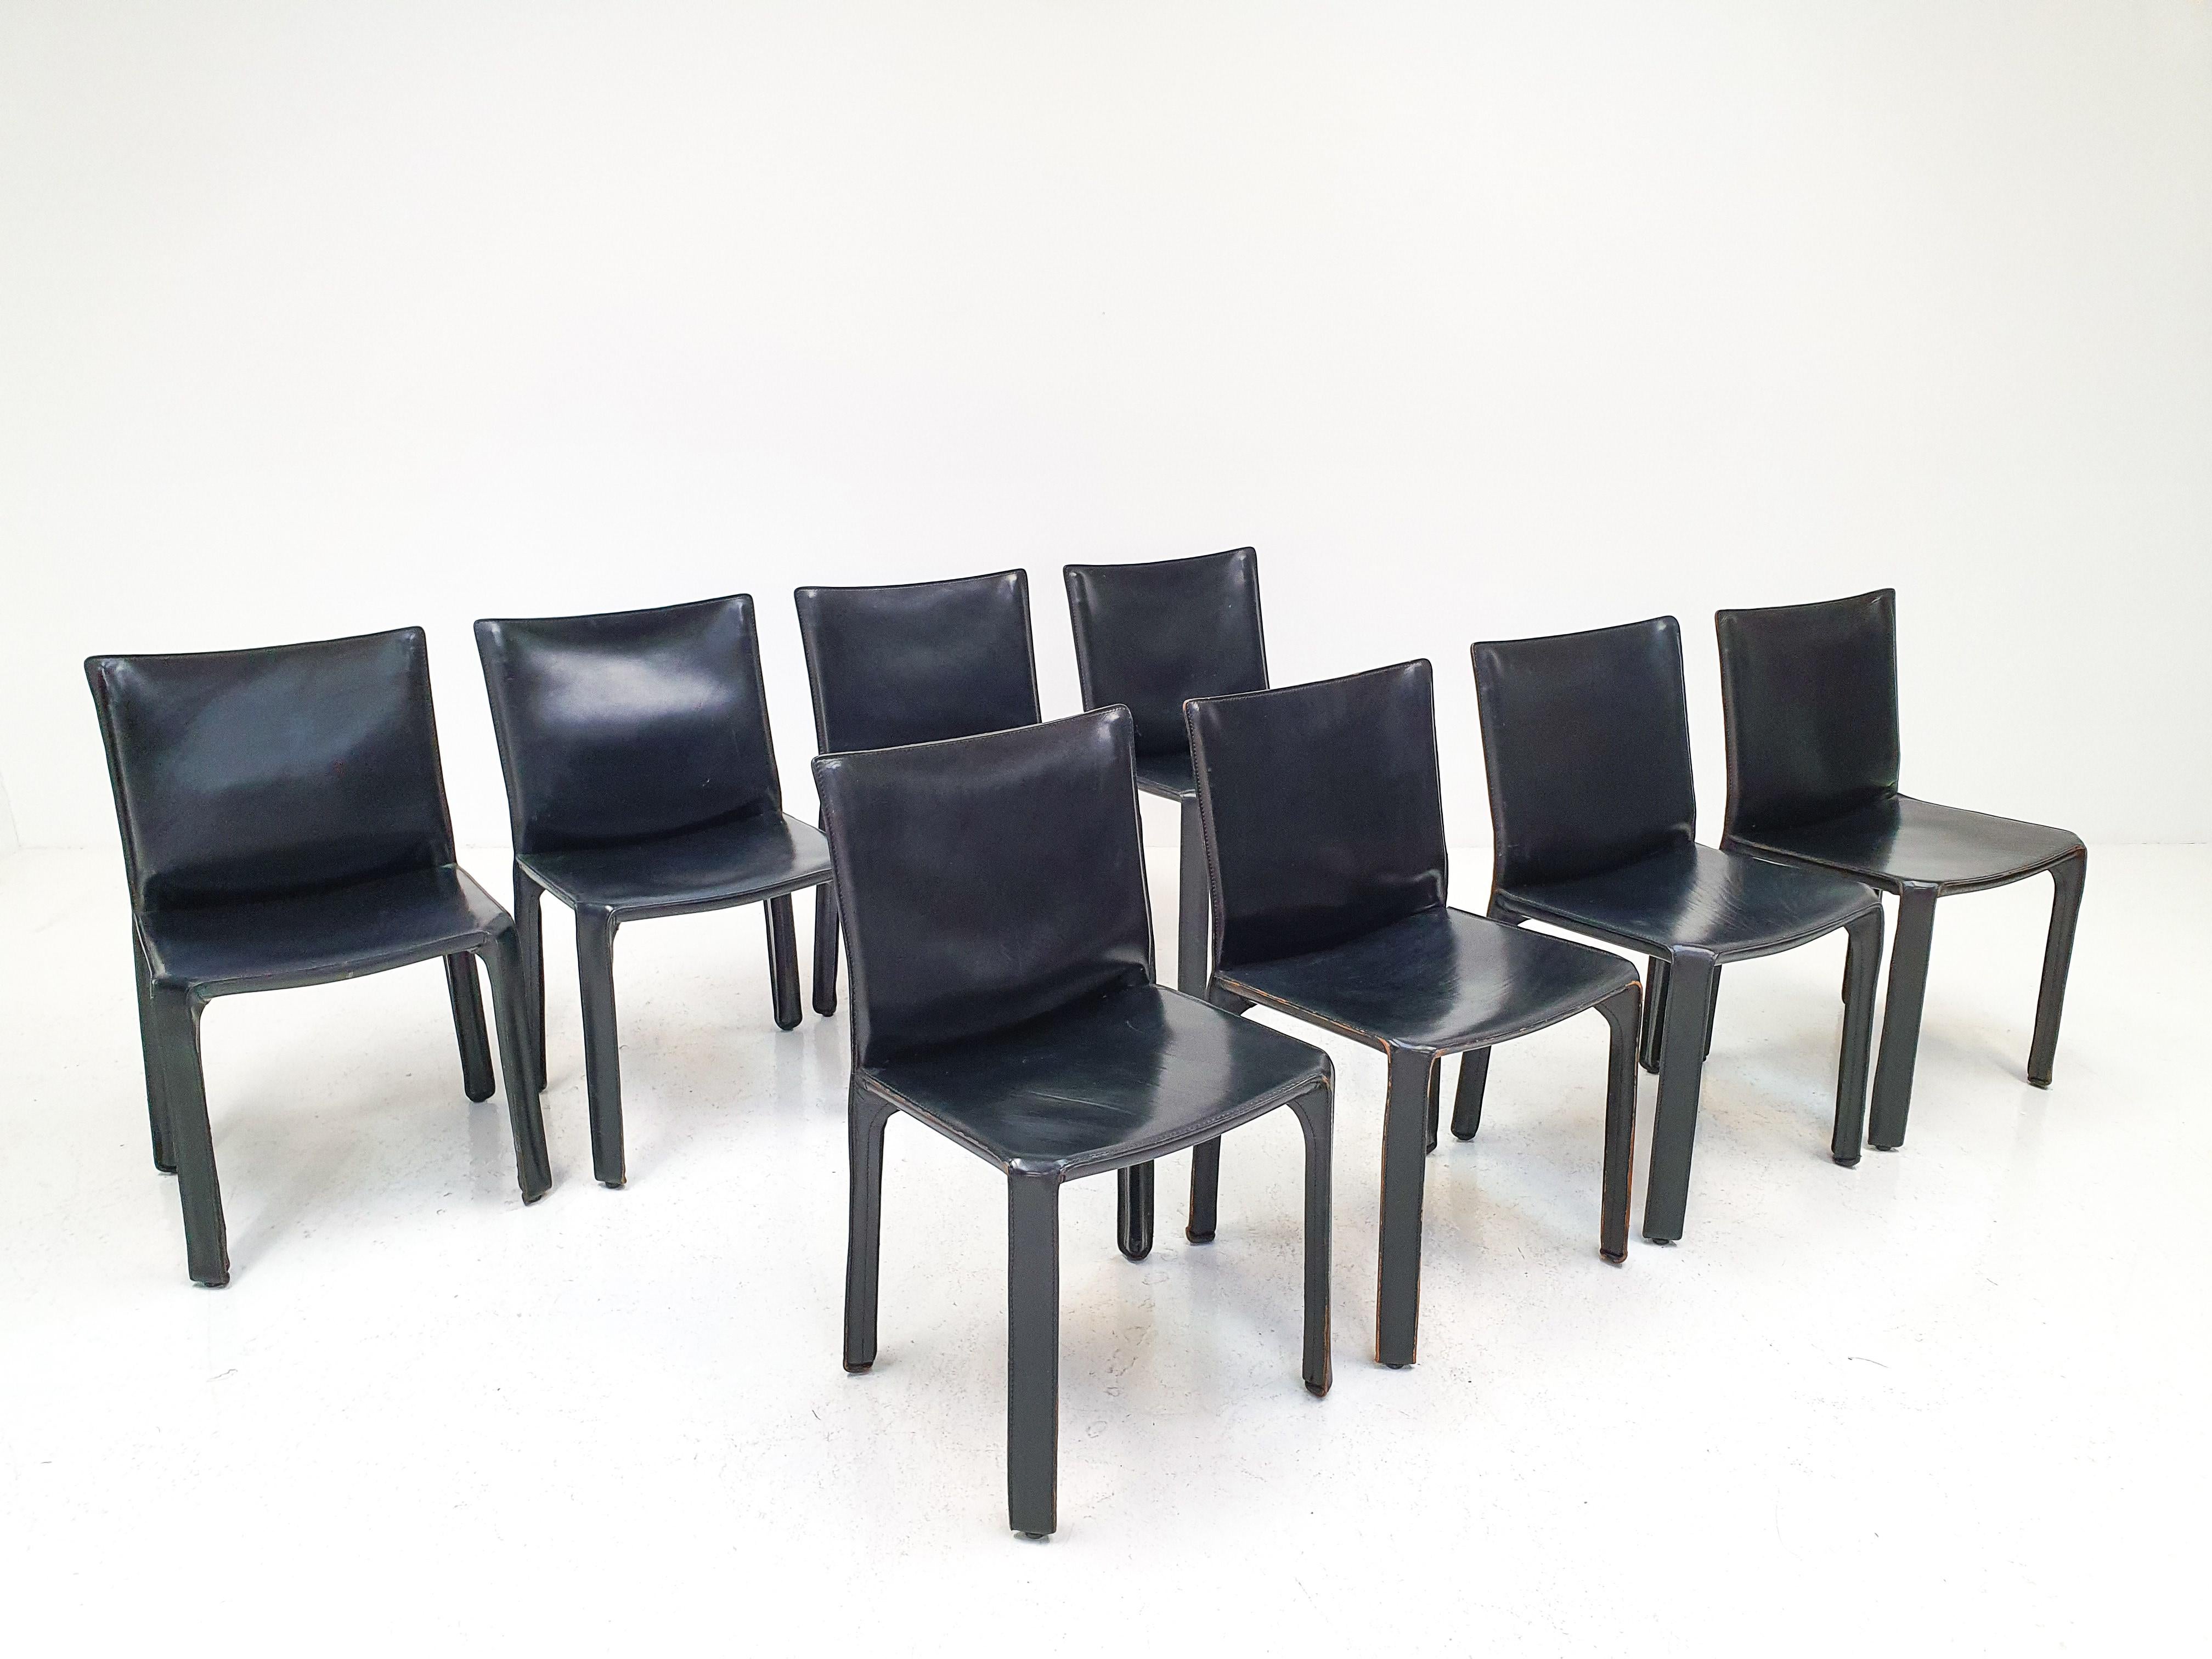 Set of 8 Mario Bellini Leather CAB Chairs in Black for Cassina, 1977, Italy 4